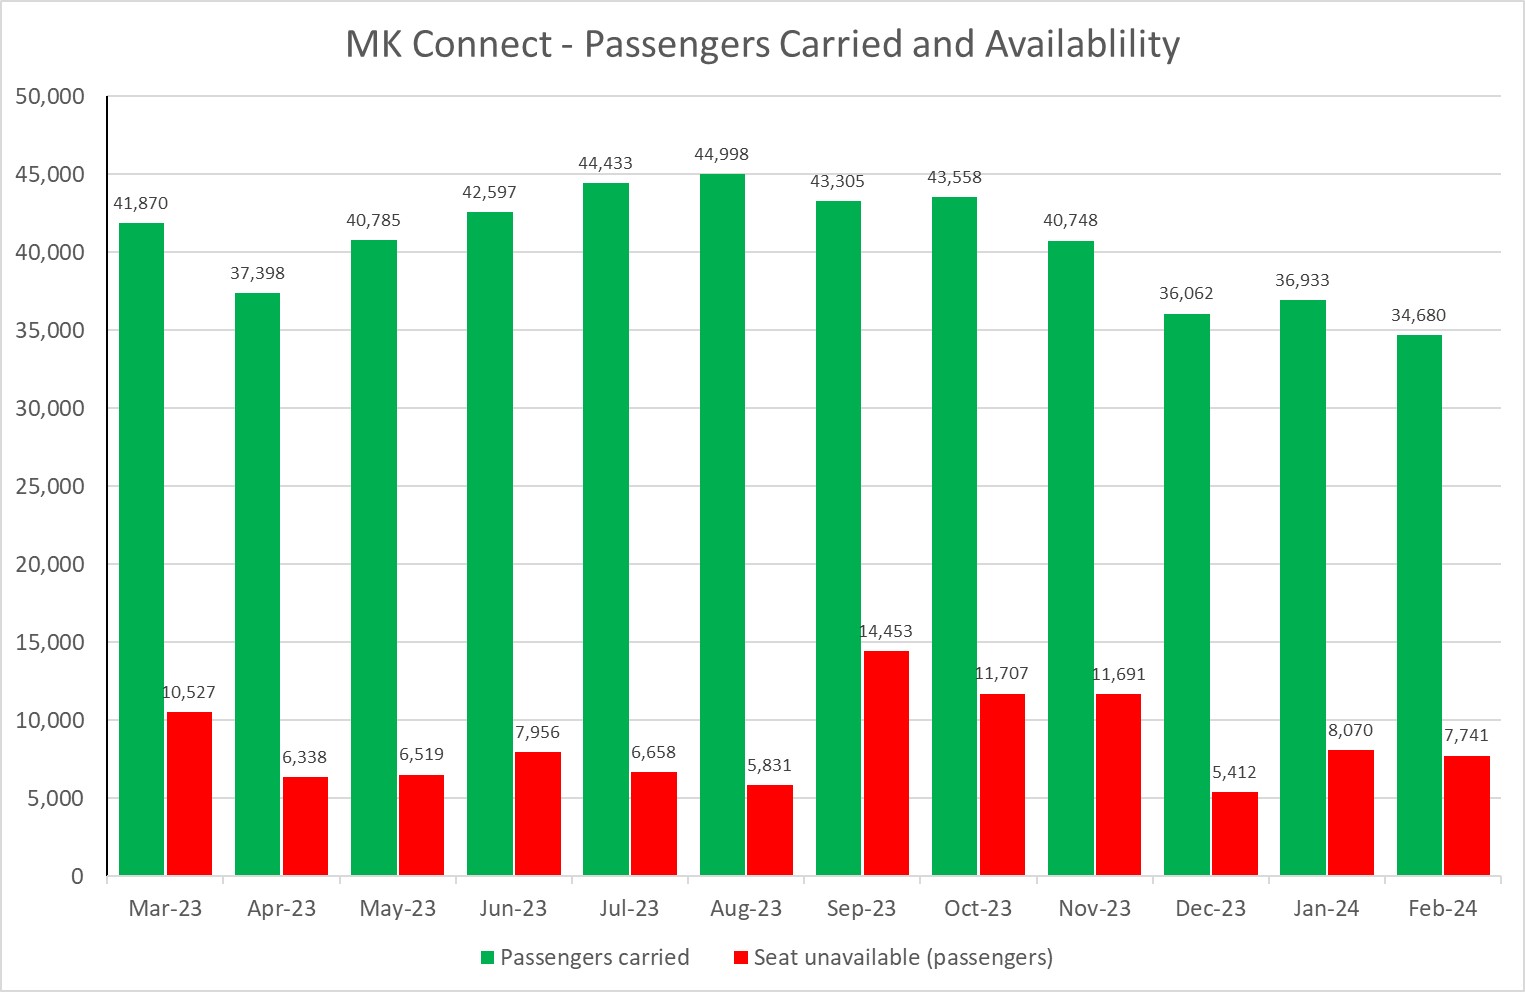 Graph showing passengers and availability of MK Connect